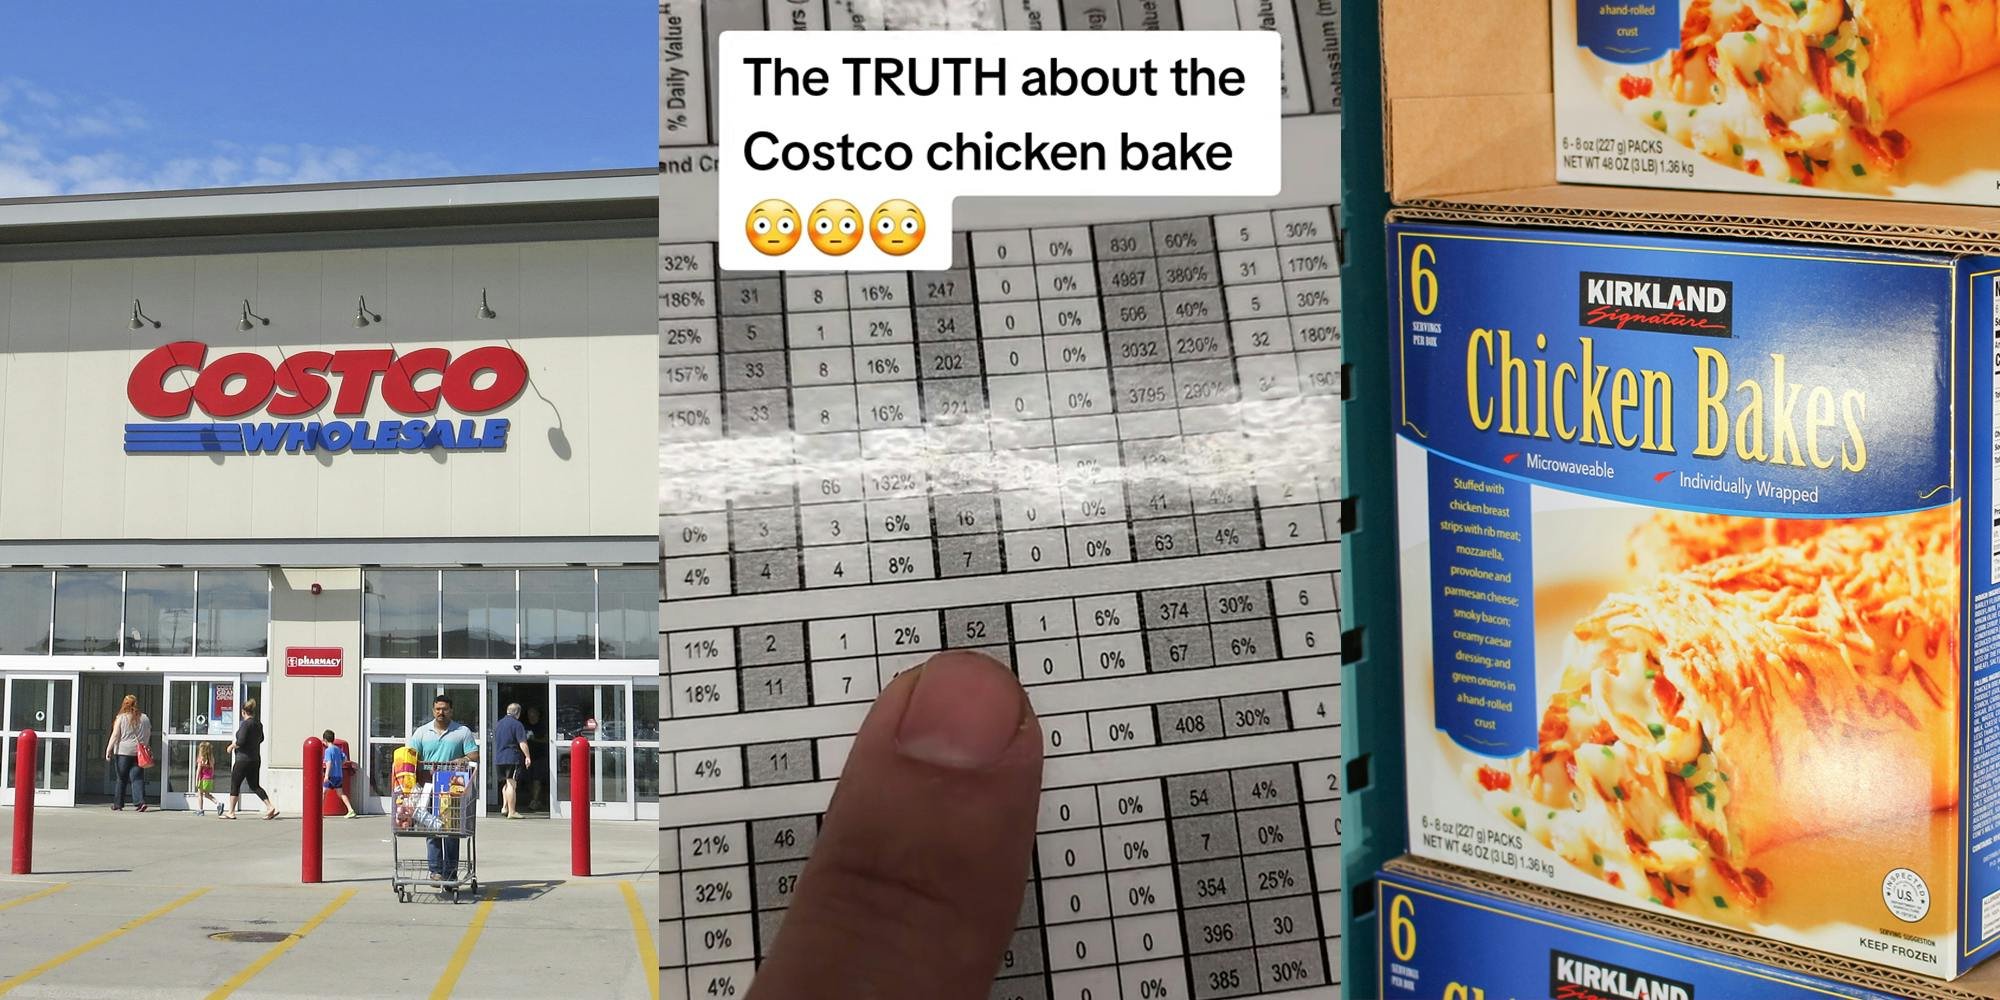 'I be eating 2 or 3 of those in one sitting': Costco customer exposes the 'truth' about Costco chicken bake